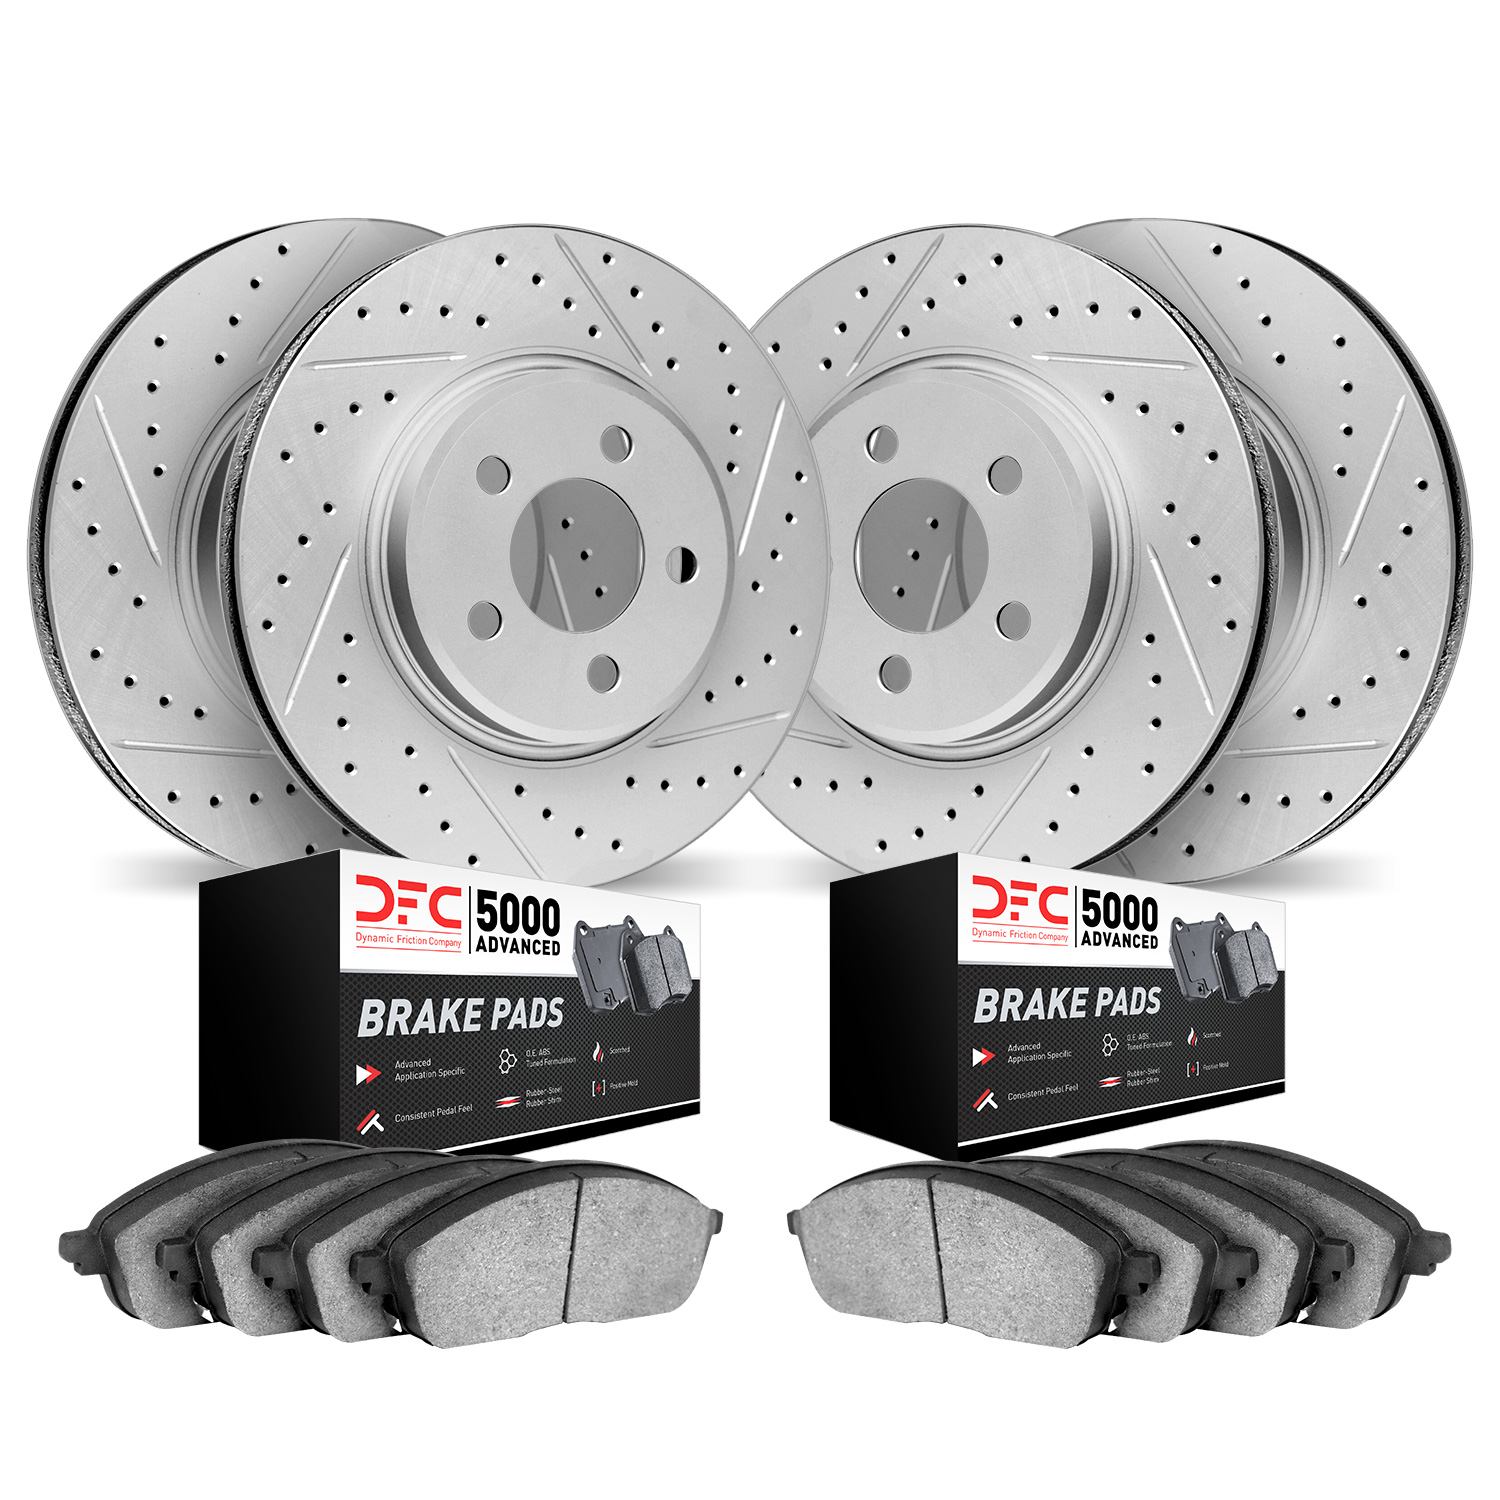 2504-54204 Geoperformance Drilled/Slotted Rotors w/5000 Advanced Brake Pads Kit, 2011-2014 Ford/Lincoln/Mercury/Mazda, Position: